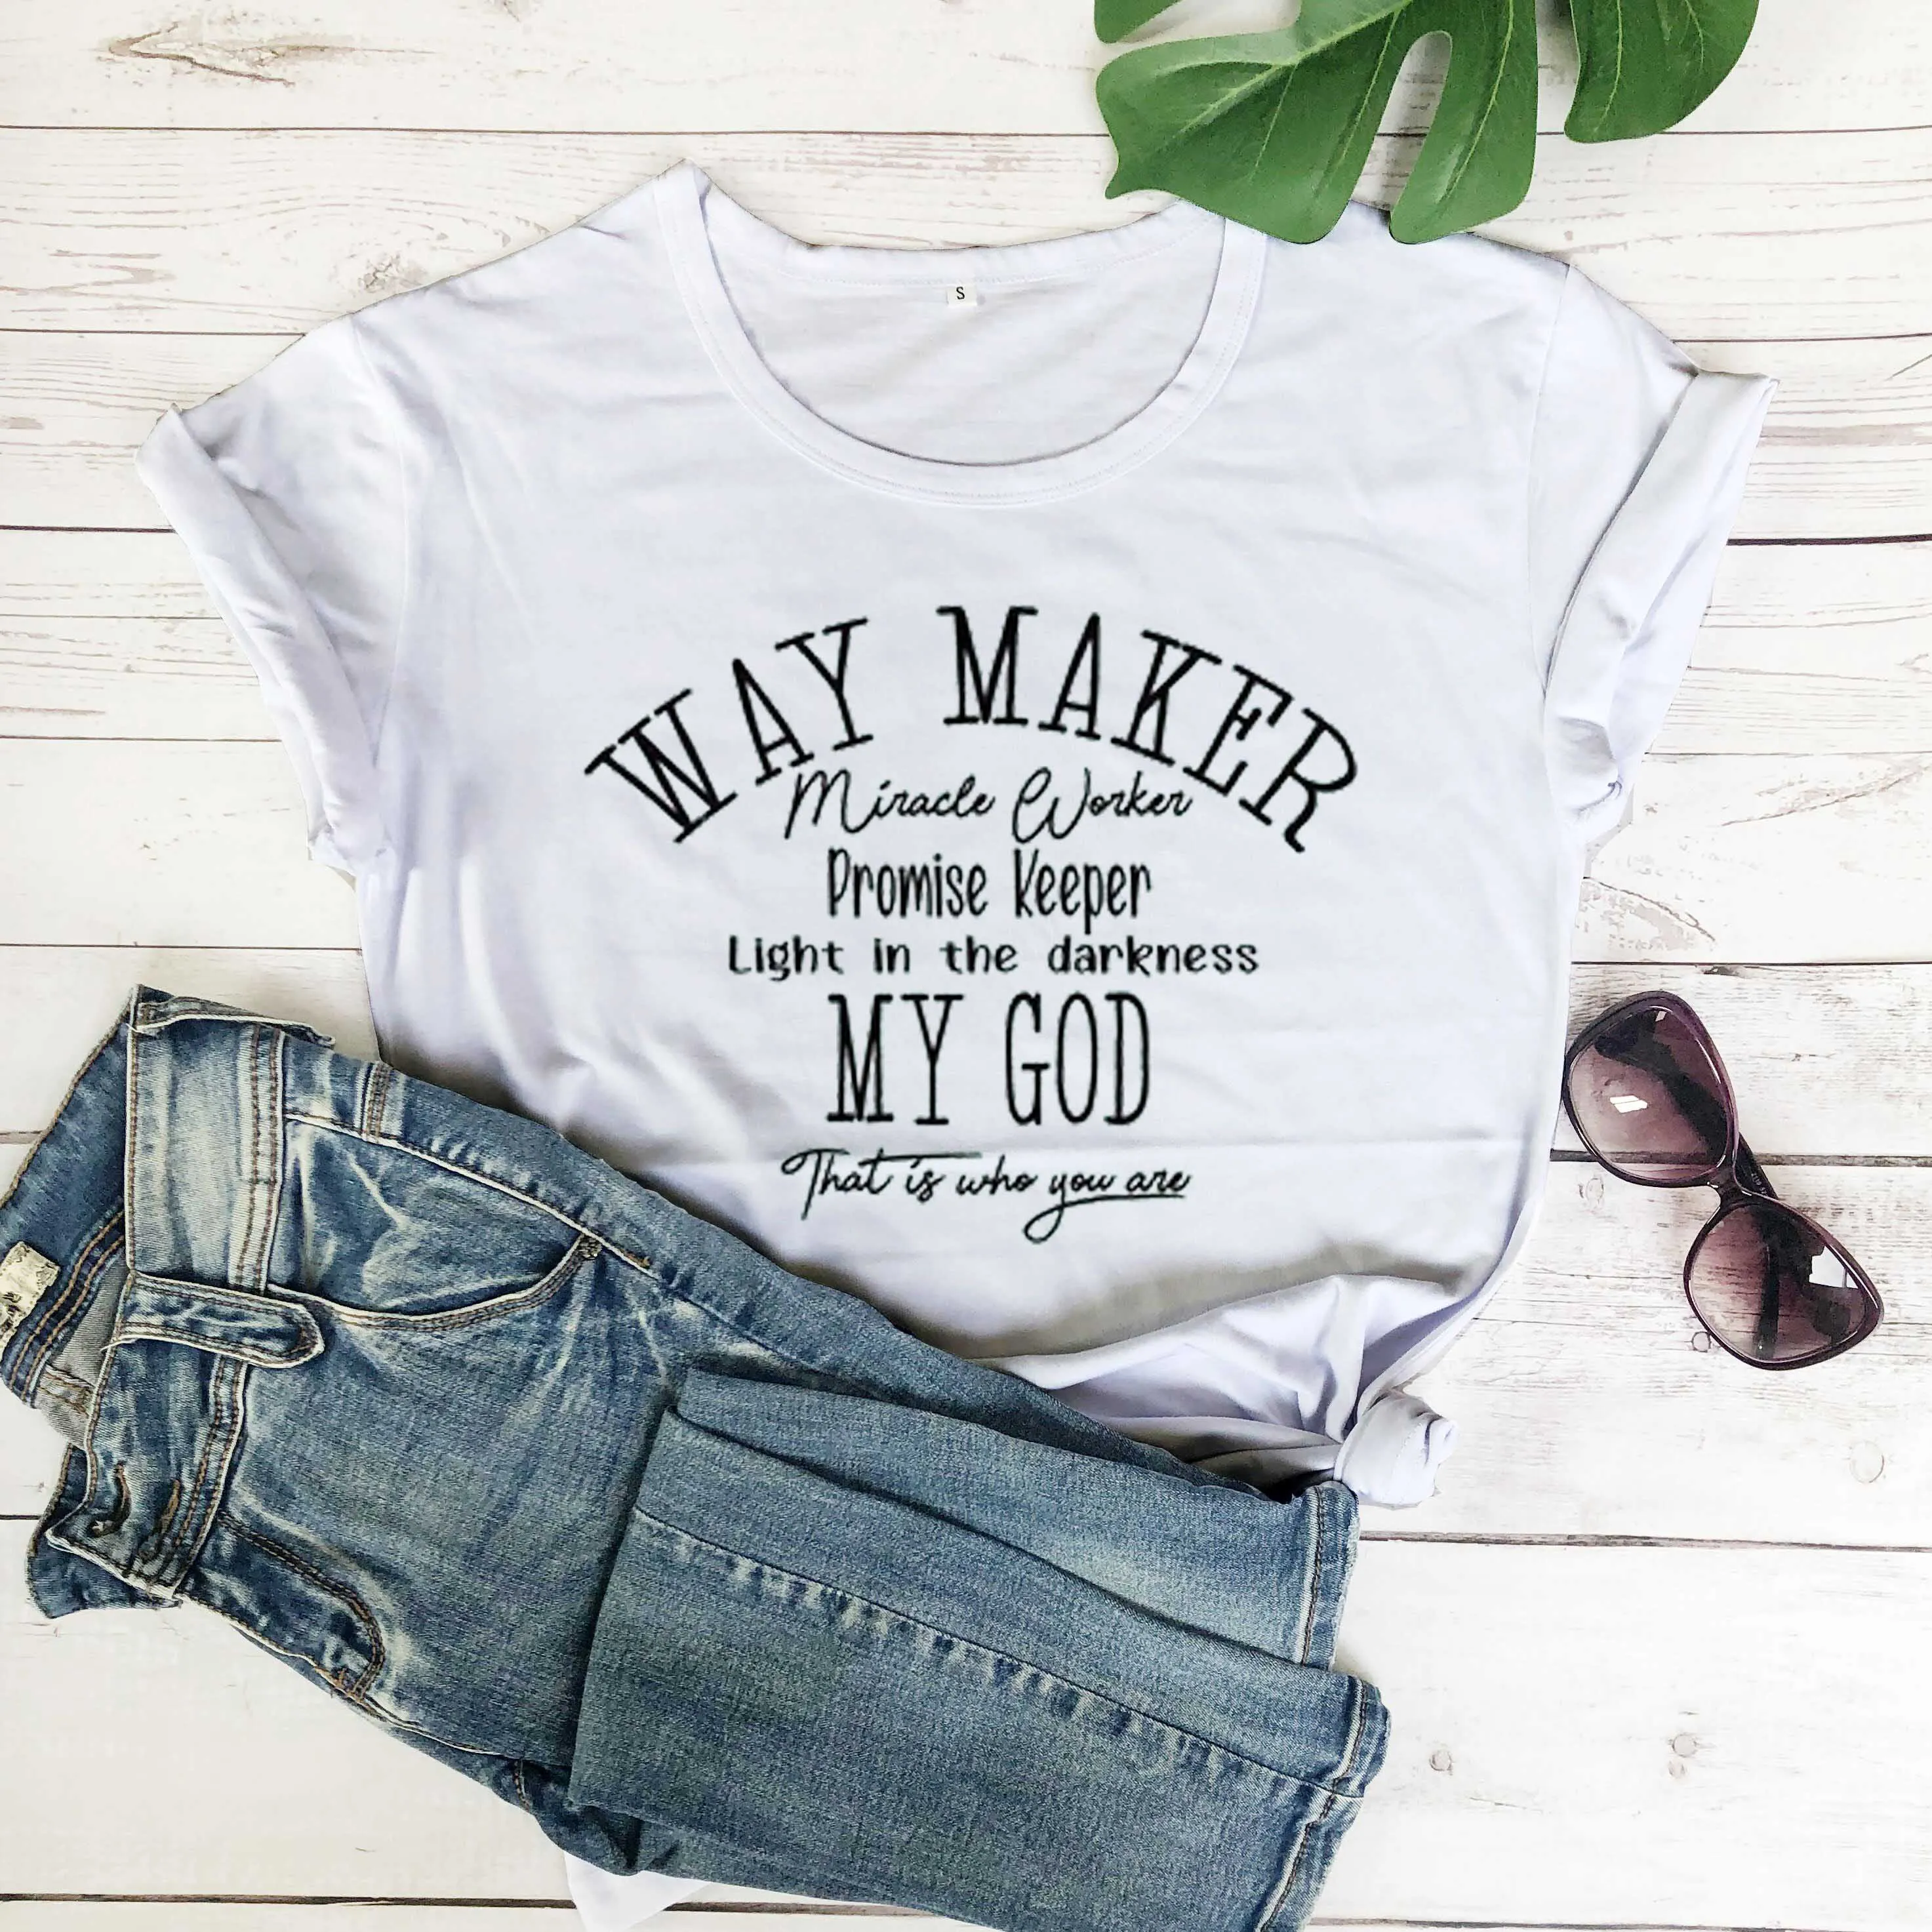 Women's Fashion Short Sleeve Way Maker Miracle Worker Letters Printed Christian T-shirt girl gift slogan fashion pure tees-M991